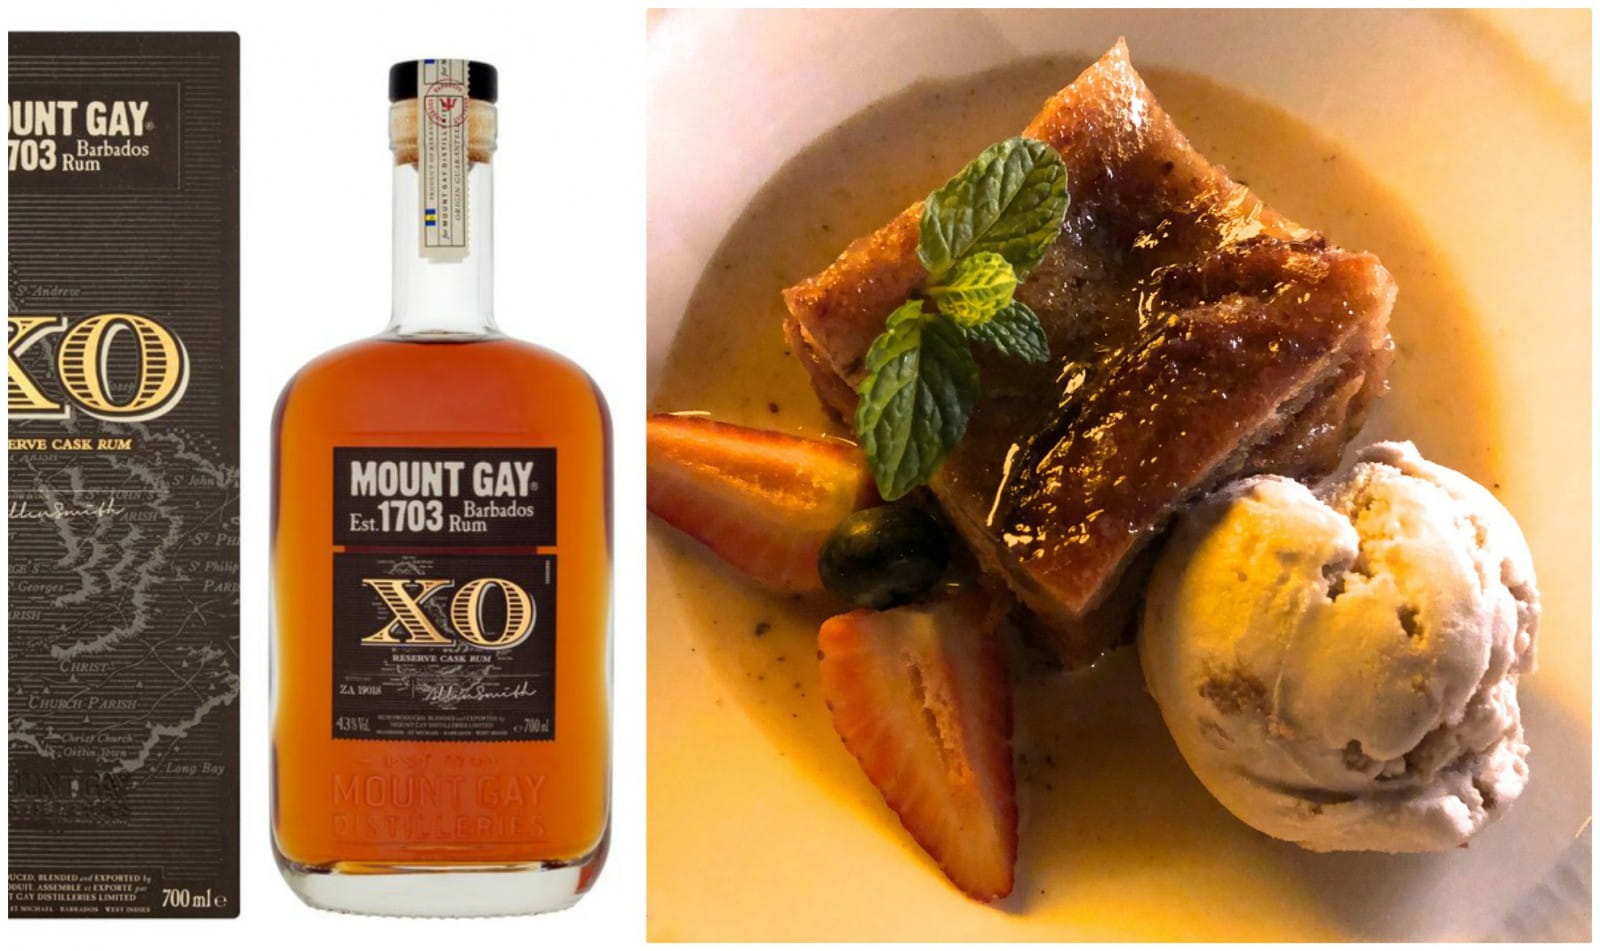 Bread pudding with Mount Gay XO Rum